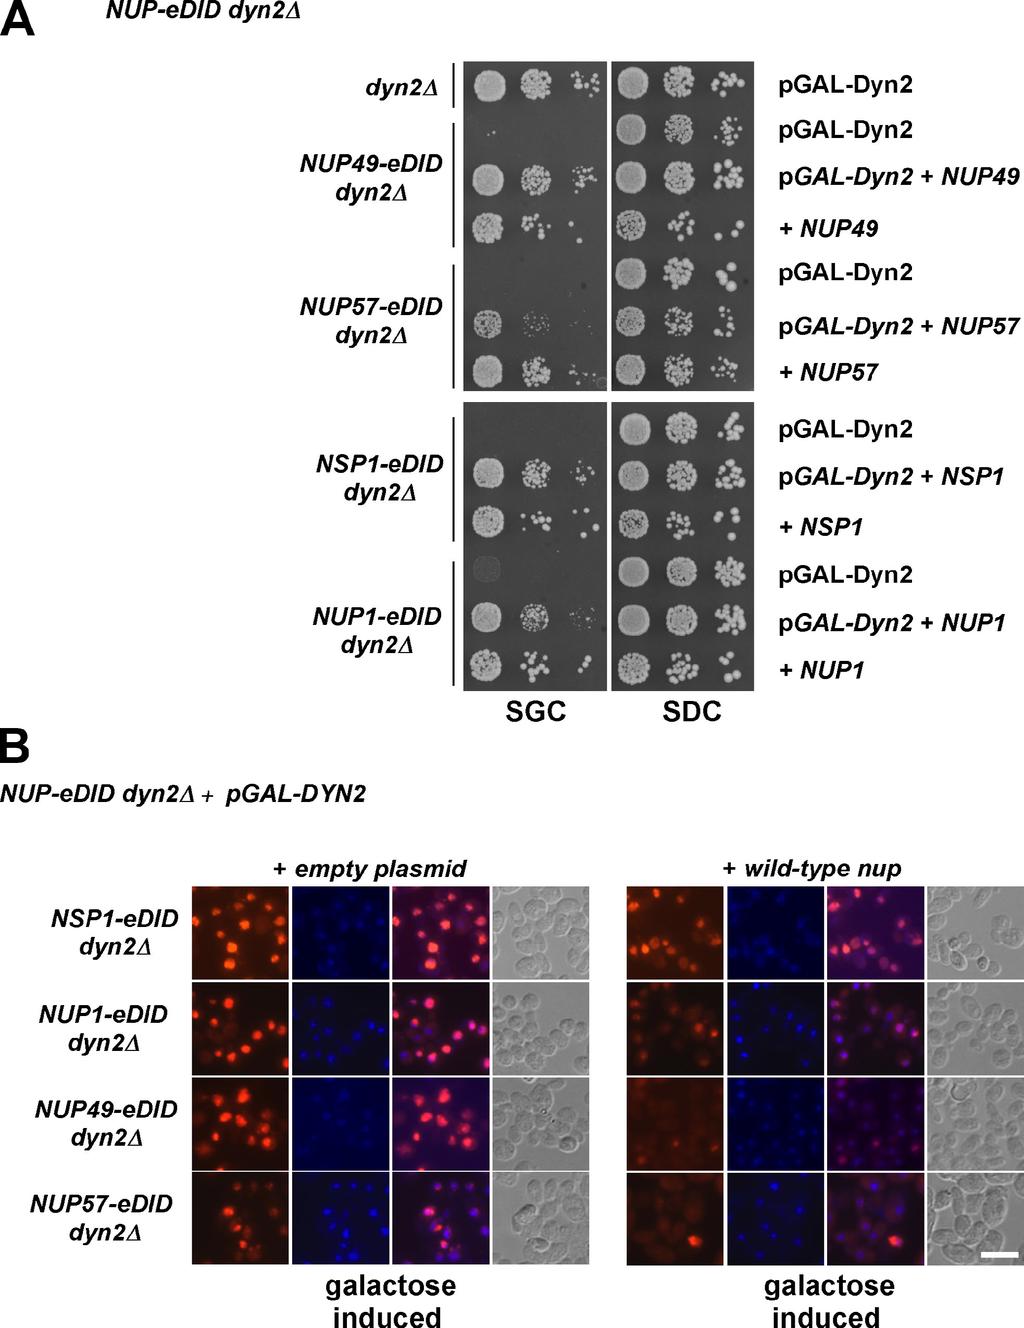 Figure S3. Analysis of growth and nucleocytoplasmic transport of NUP-eDID + pgal-dyn2 strains transformed with the respective wild-type Nups.